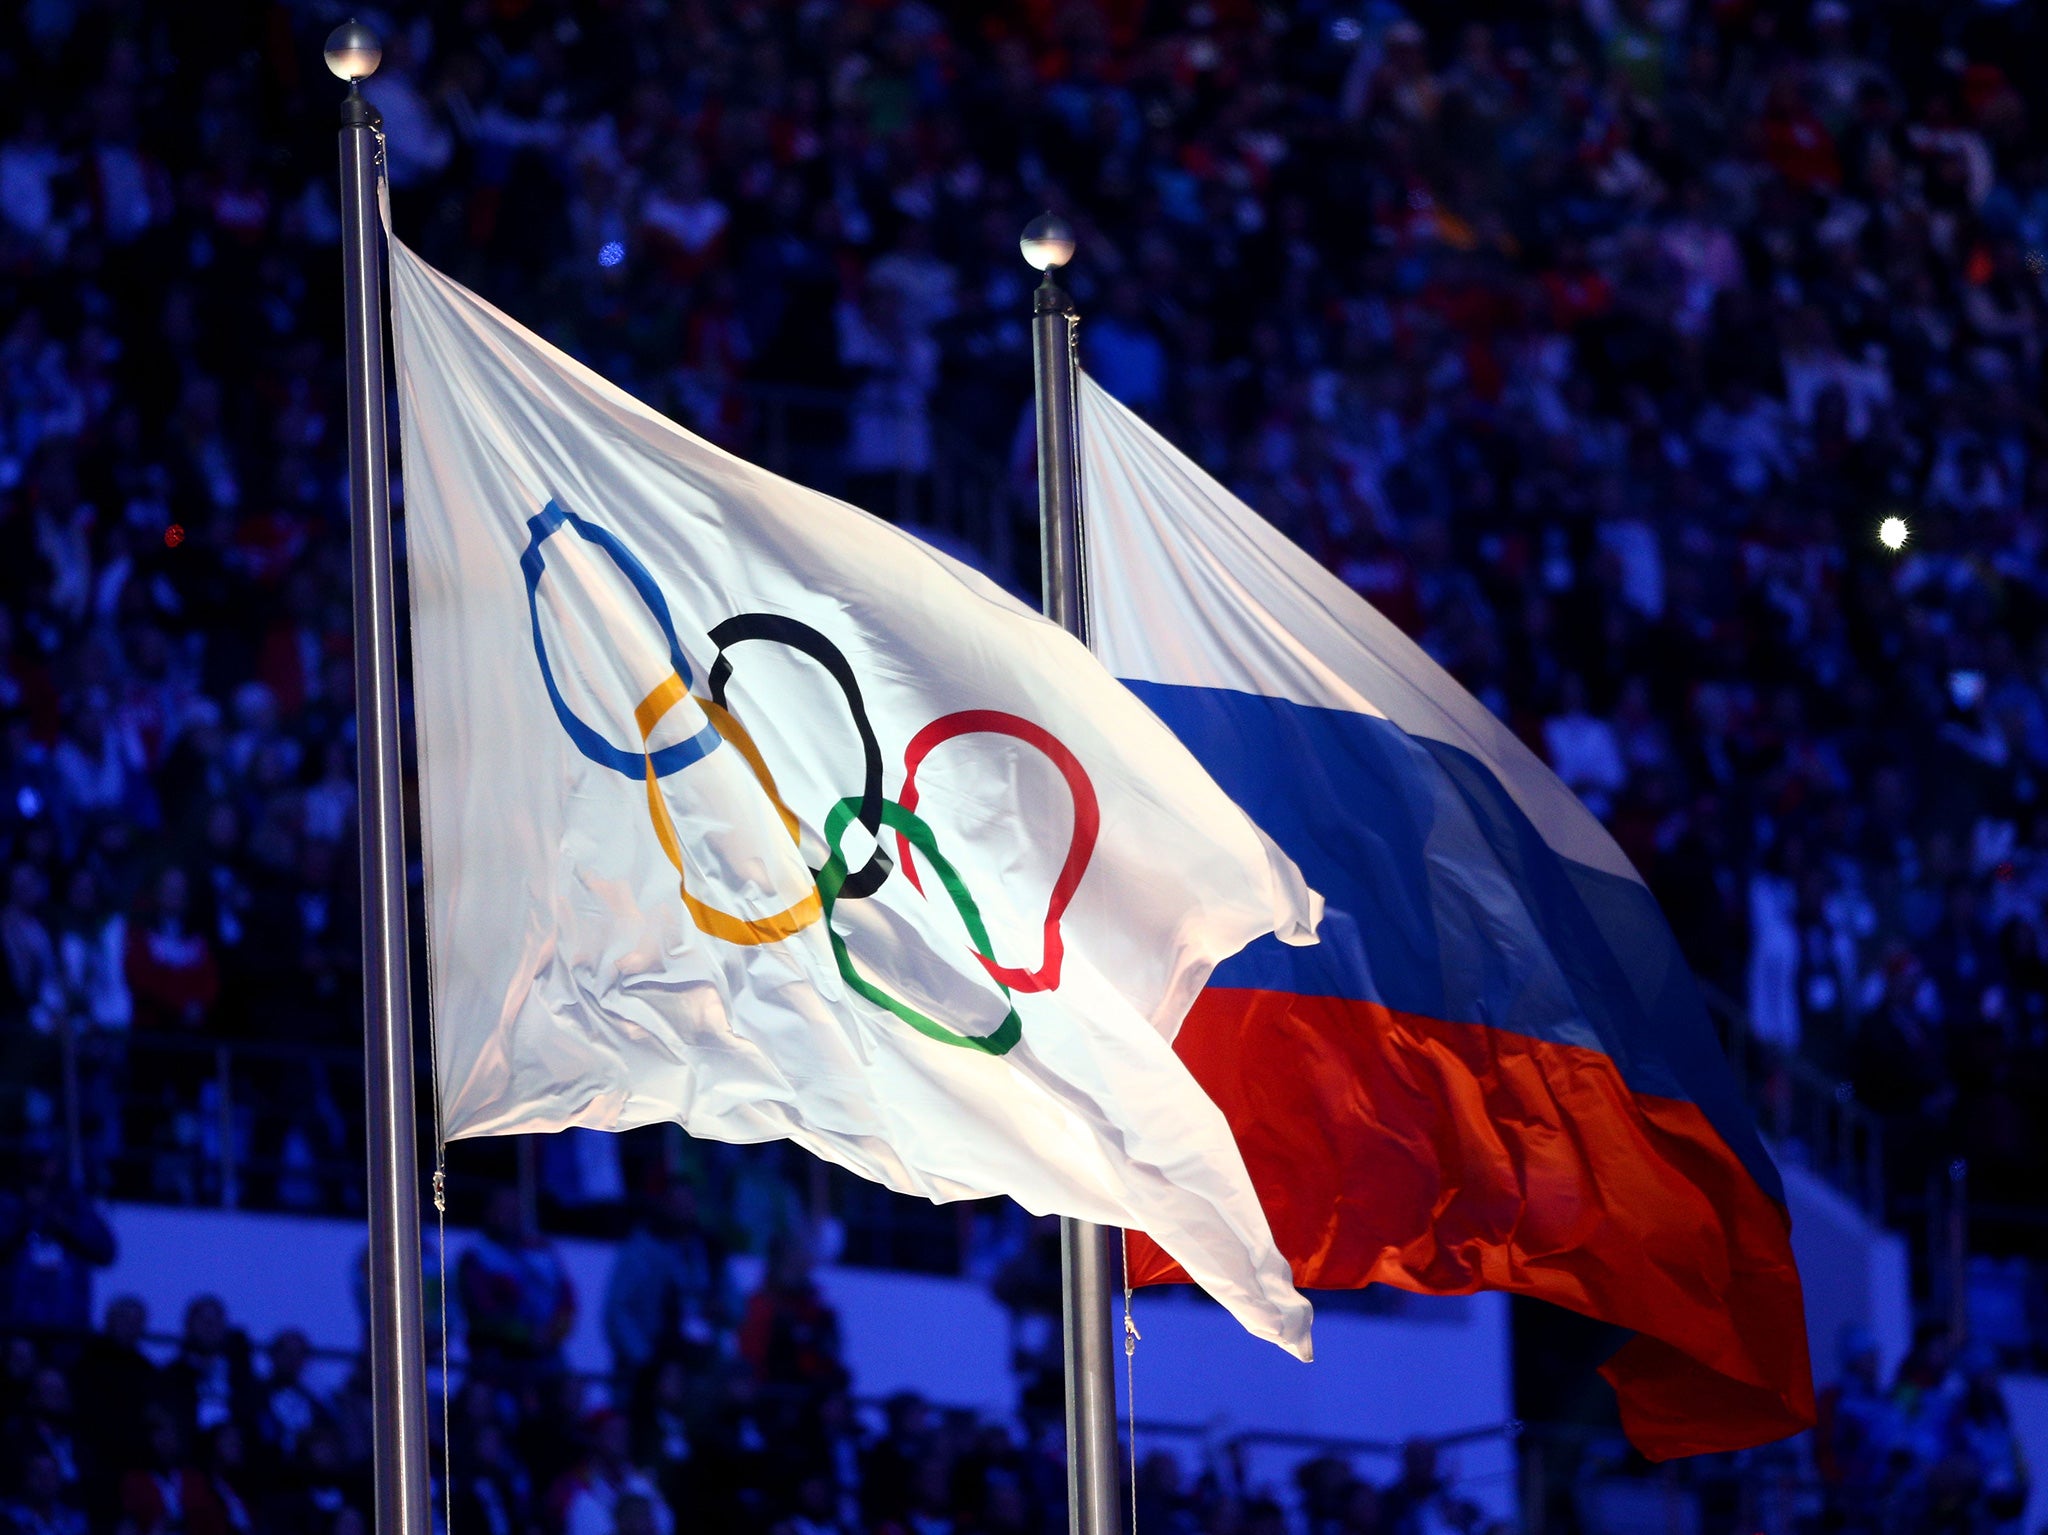 Olympic and Russian flags at 2014 Winter Games in Sochi